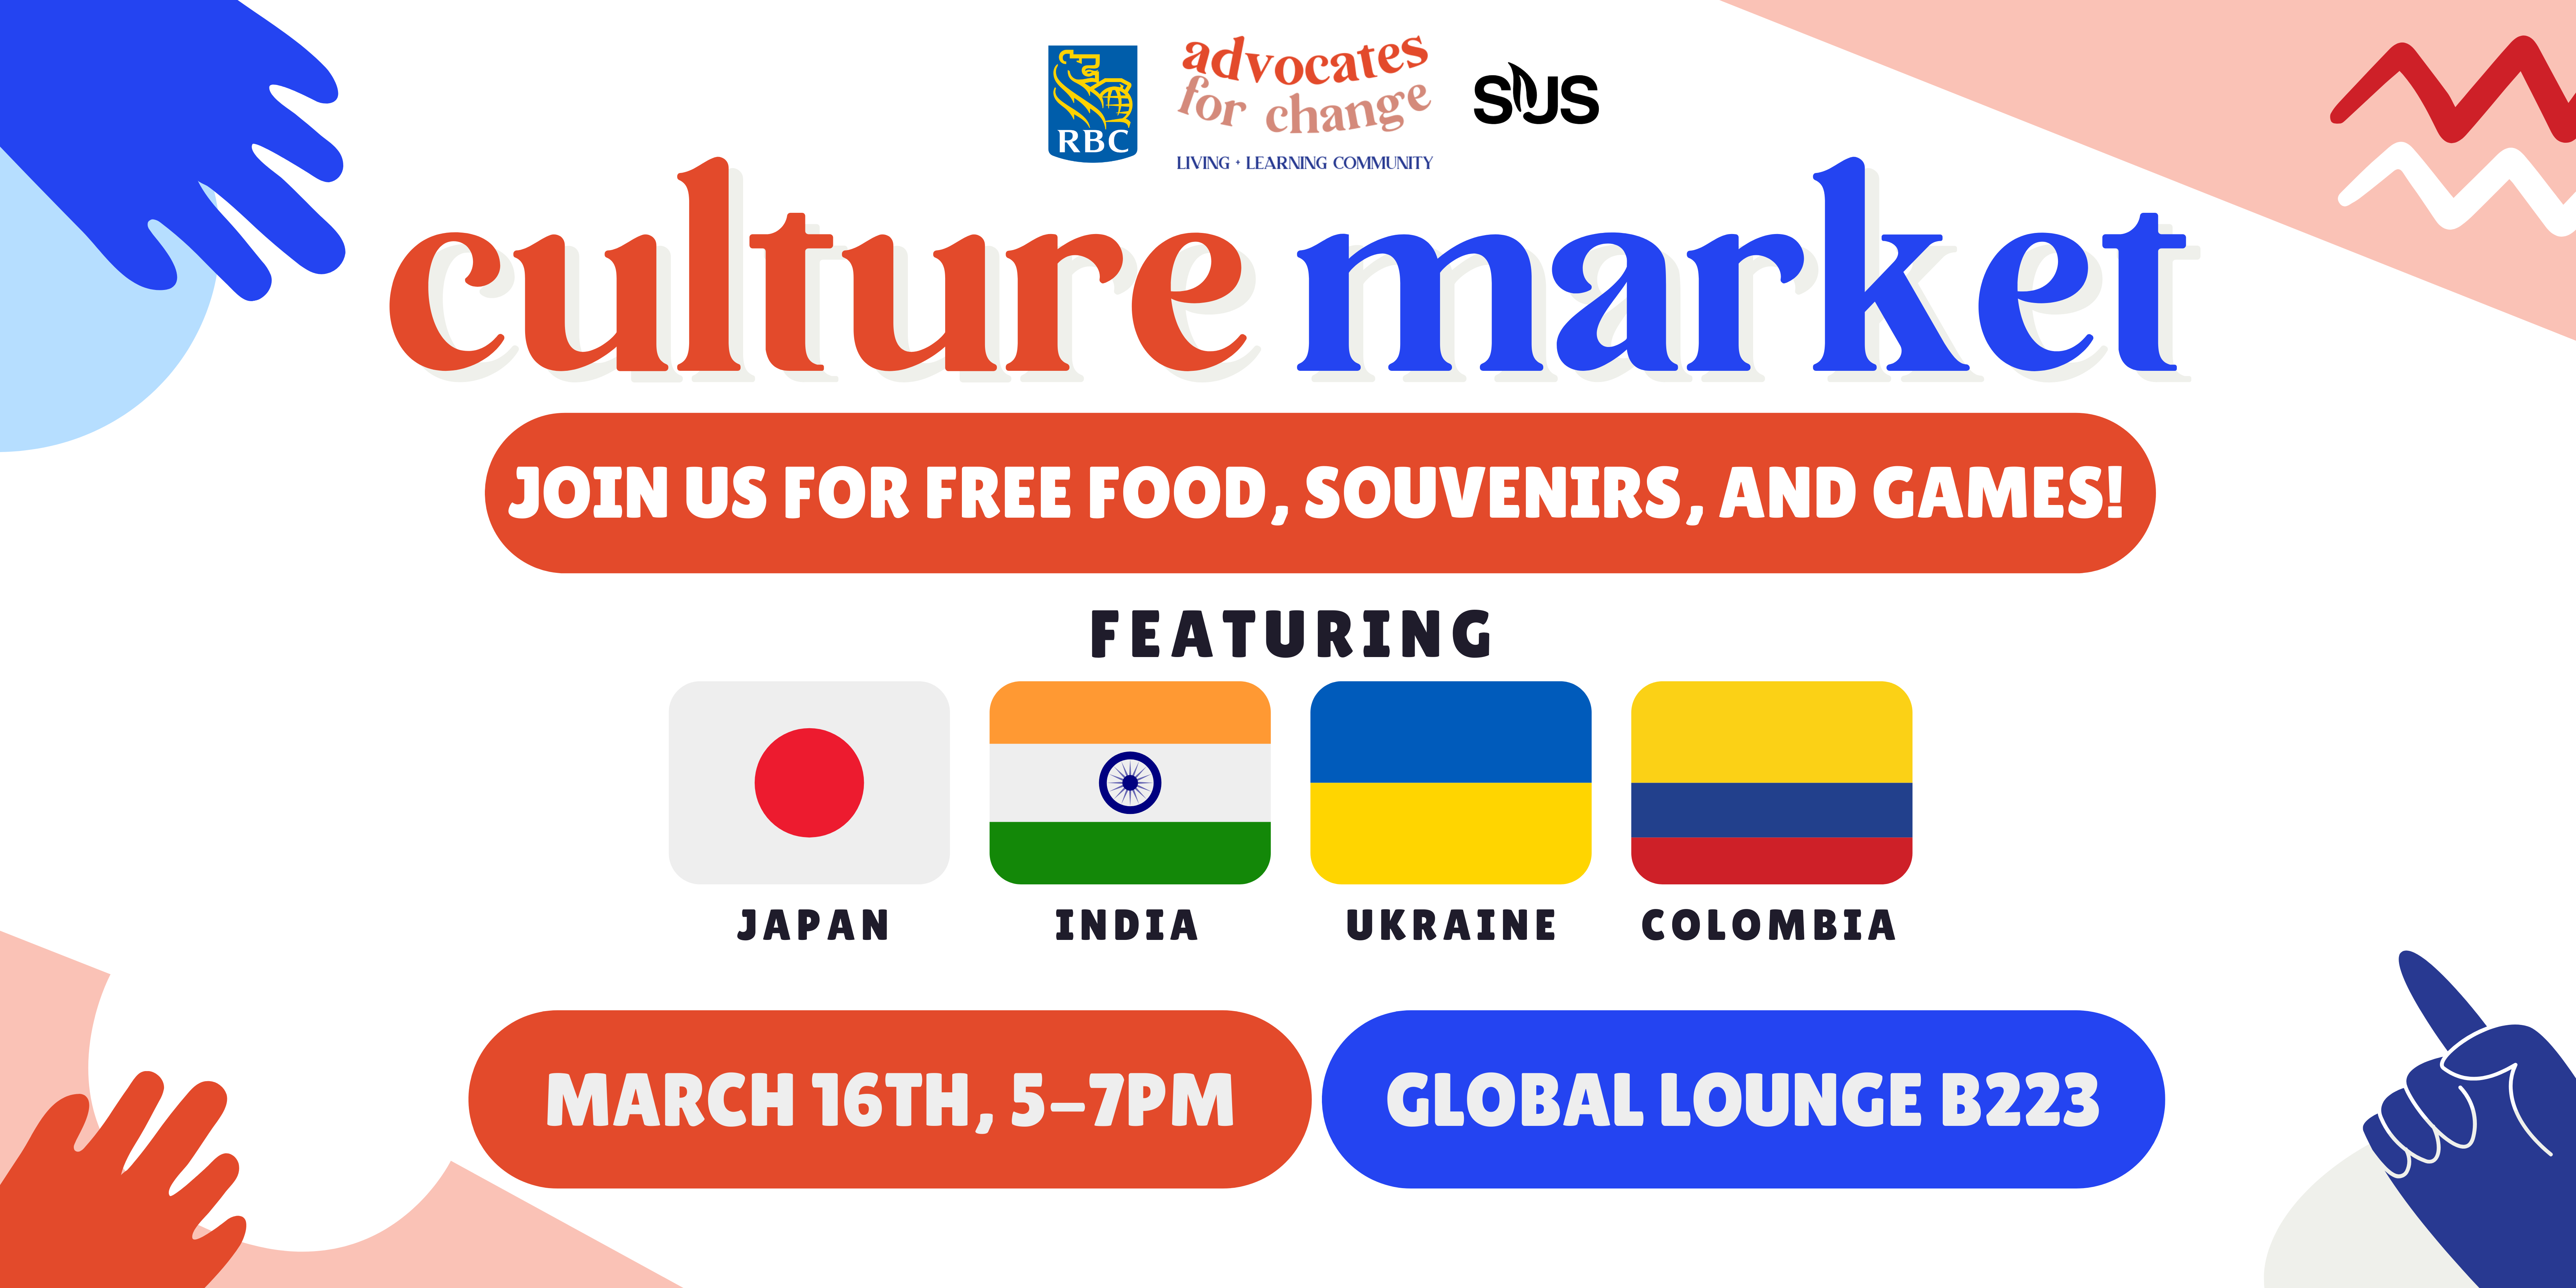 The poster says "Join us for free food, souvenirs, and games!" Culture Market features Japanese, Indian, Ukrainian and Colombian cultures. It is happening on March 16, 5-7 PM, in Global Lounge (B223).